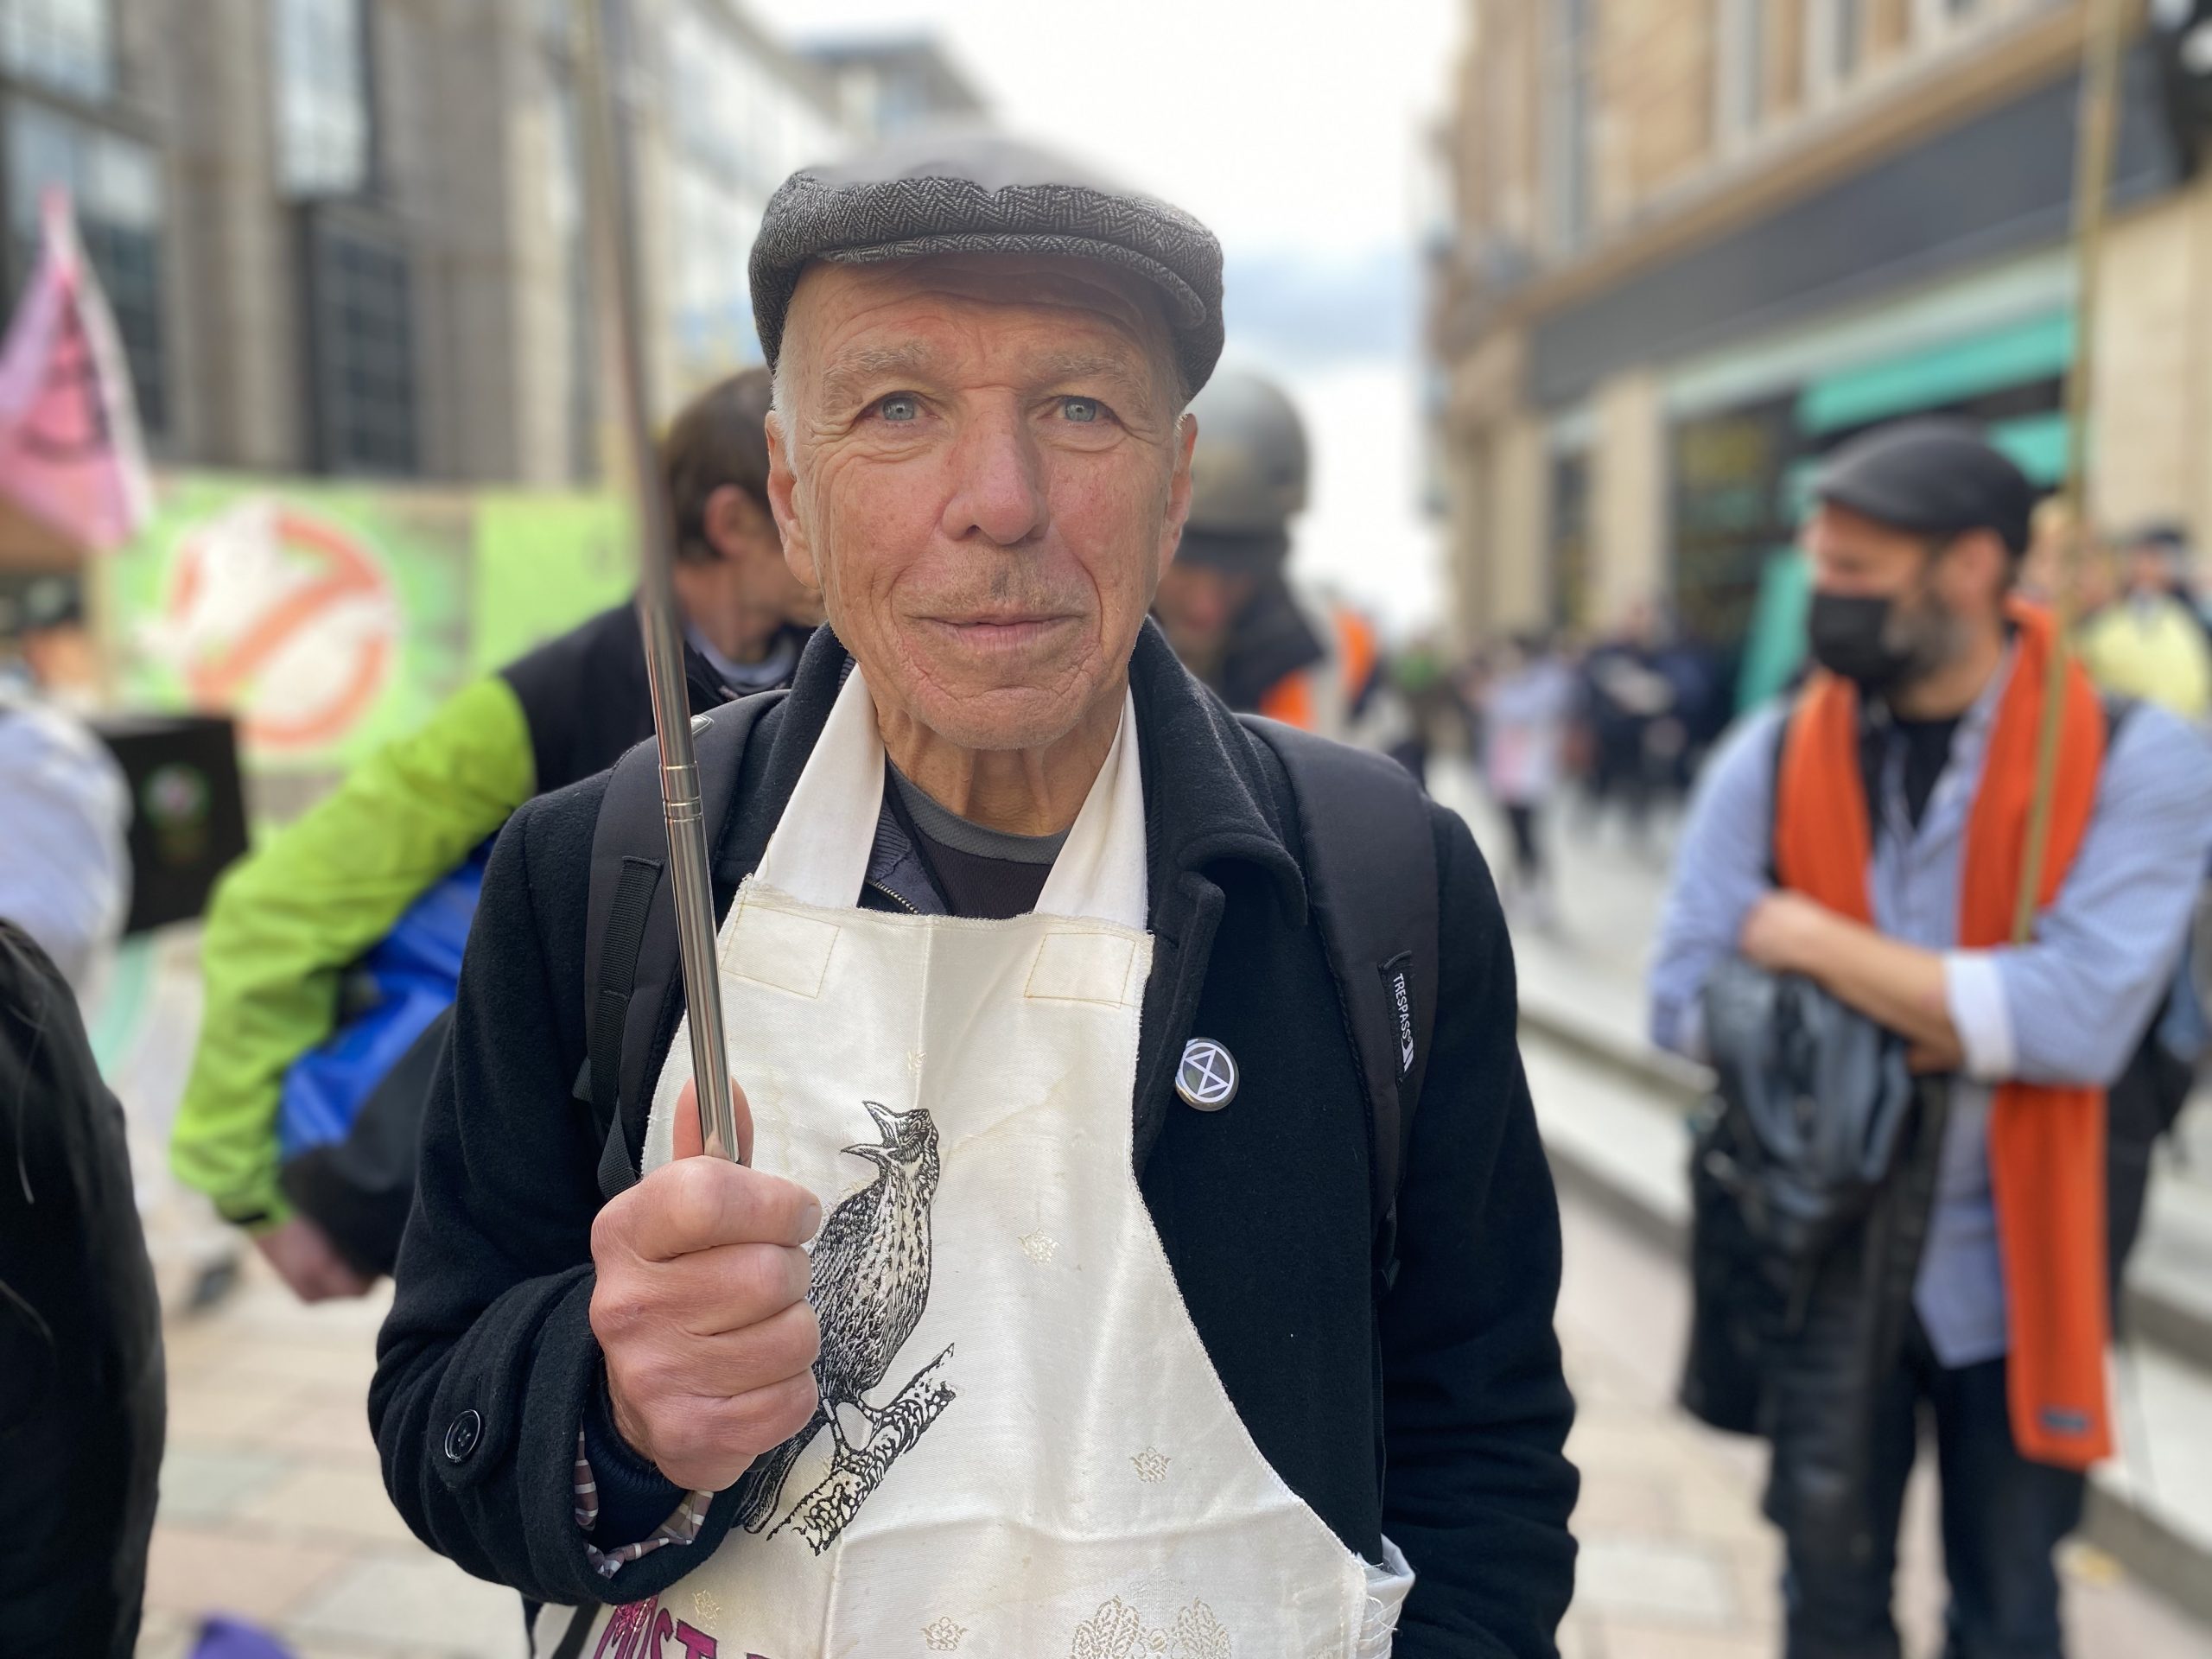 John walks the streets of Glasgow, taking part in the Extinction Rebellion demo. He is wearing a flat cap, a jacket with an XR badge on it and an apron with a picture of a bird on it.